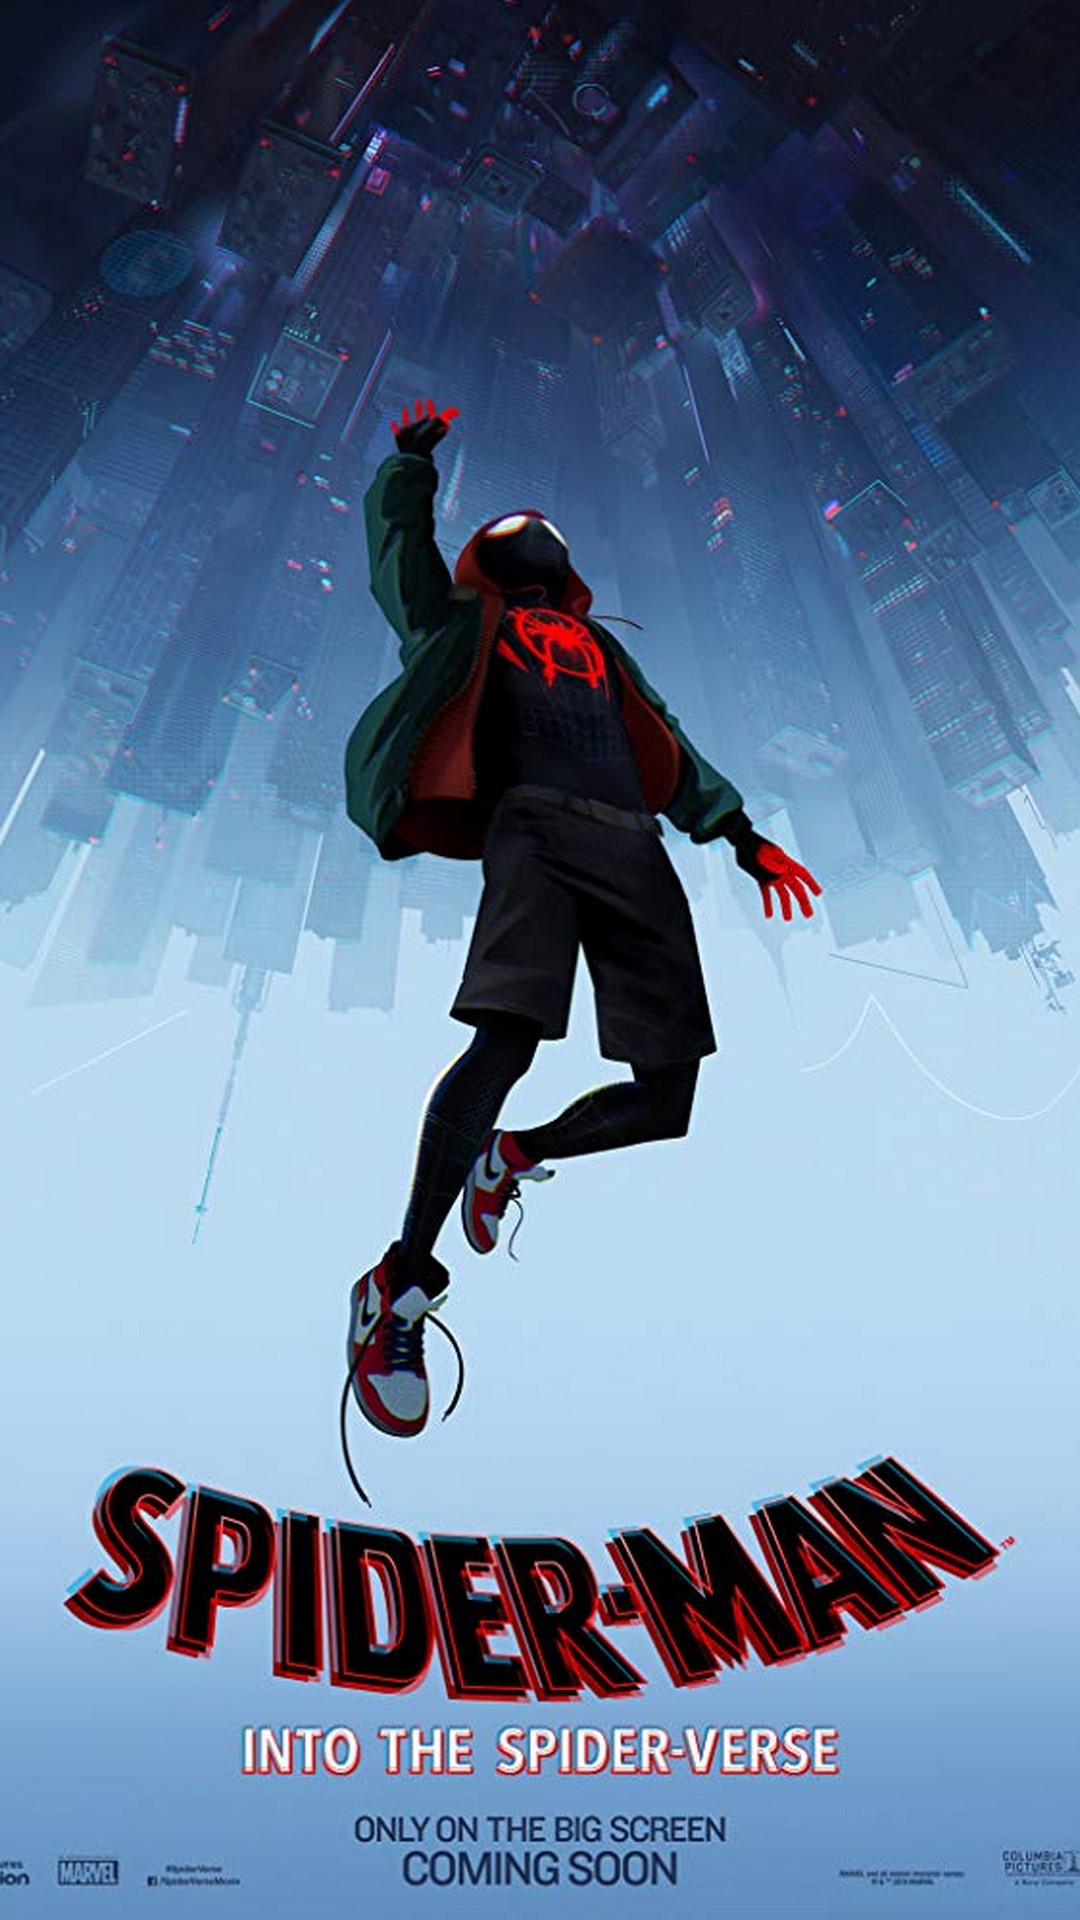 Spider-Man Into the Spider-Verse iPhone Wallpaper with resolution 1080X1920 pixel. You can make this wallpaper for your iPhone 5, 6, 7, 8, X backgrounds, Mobile Screensaver, or iPad Lock Screen